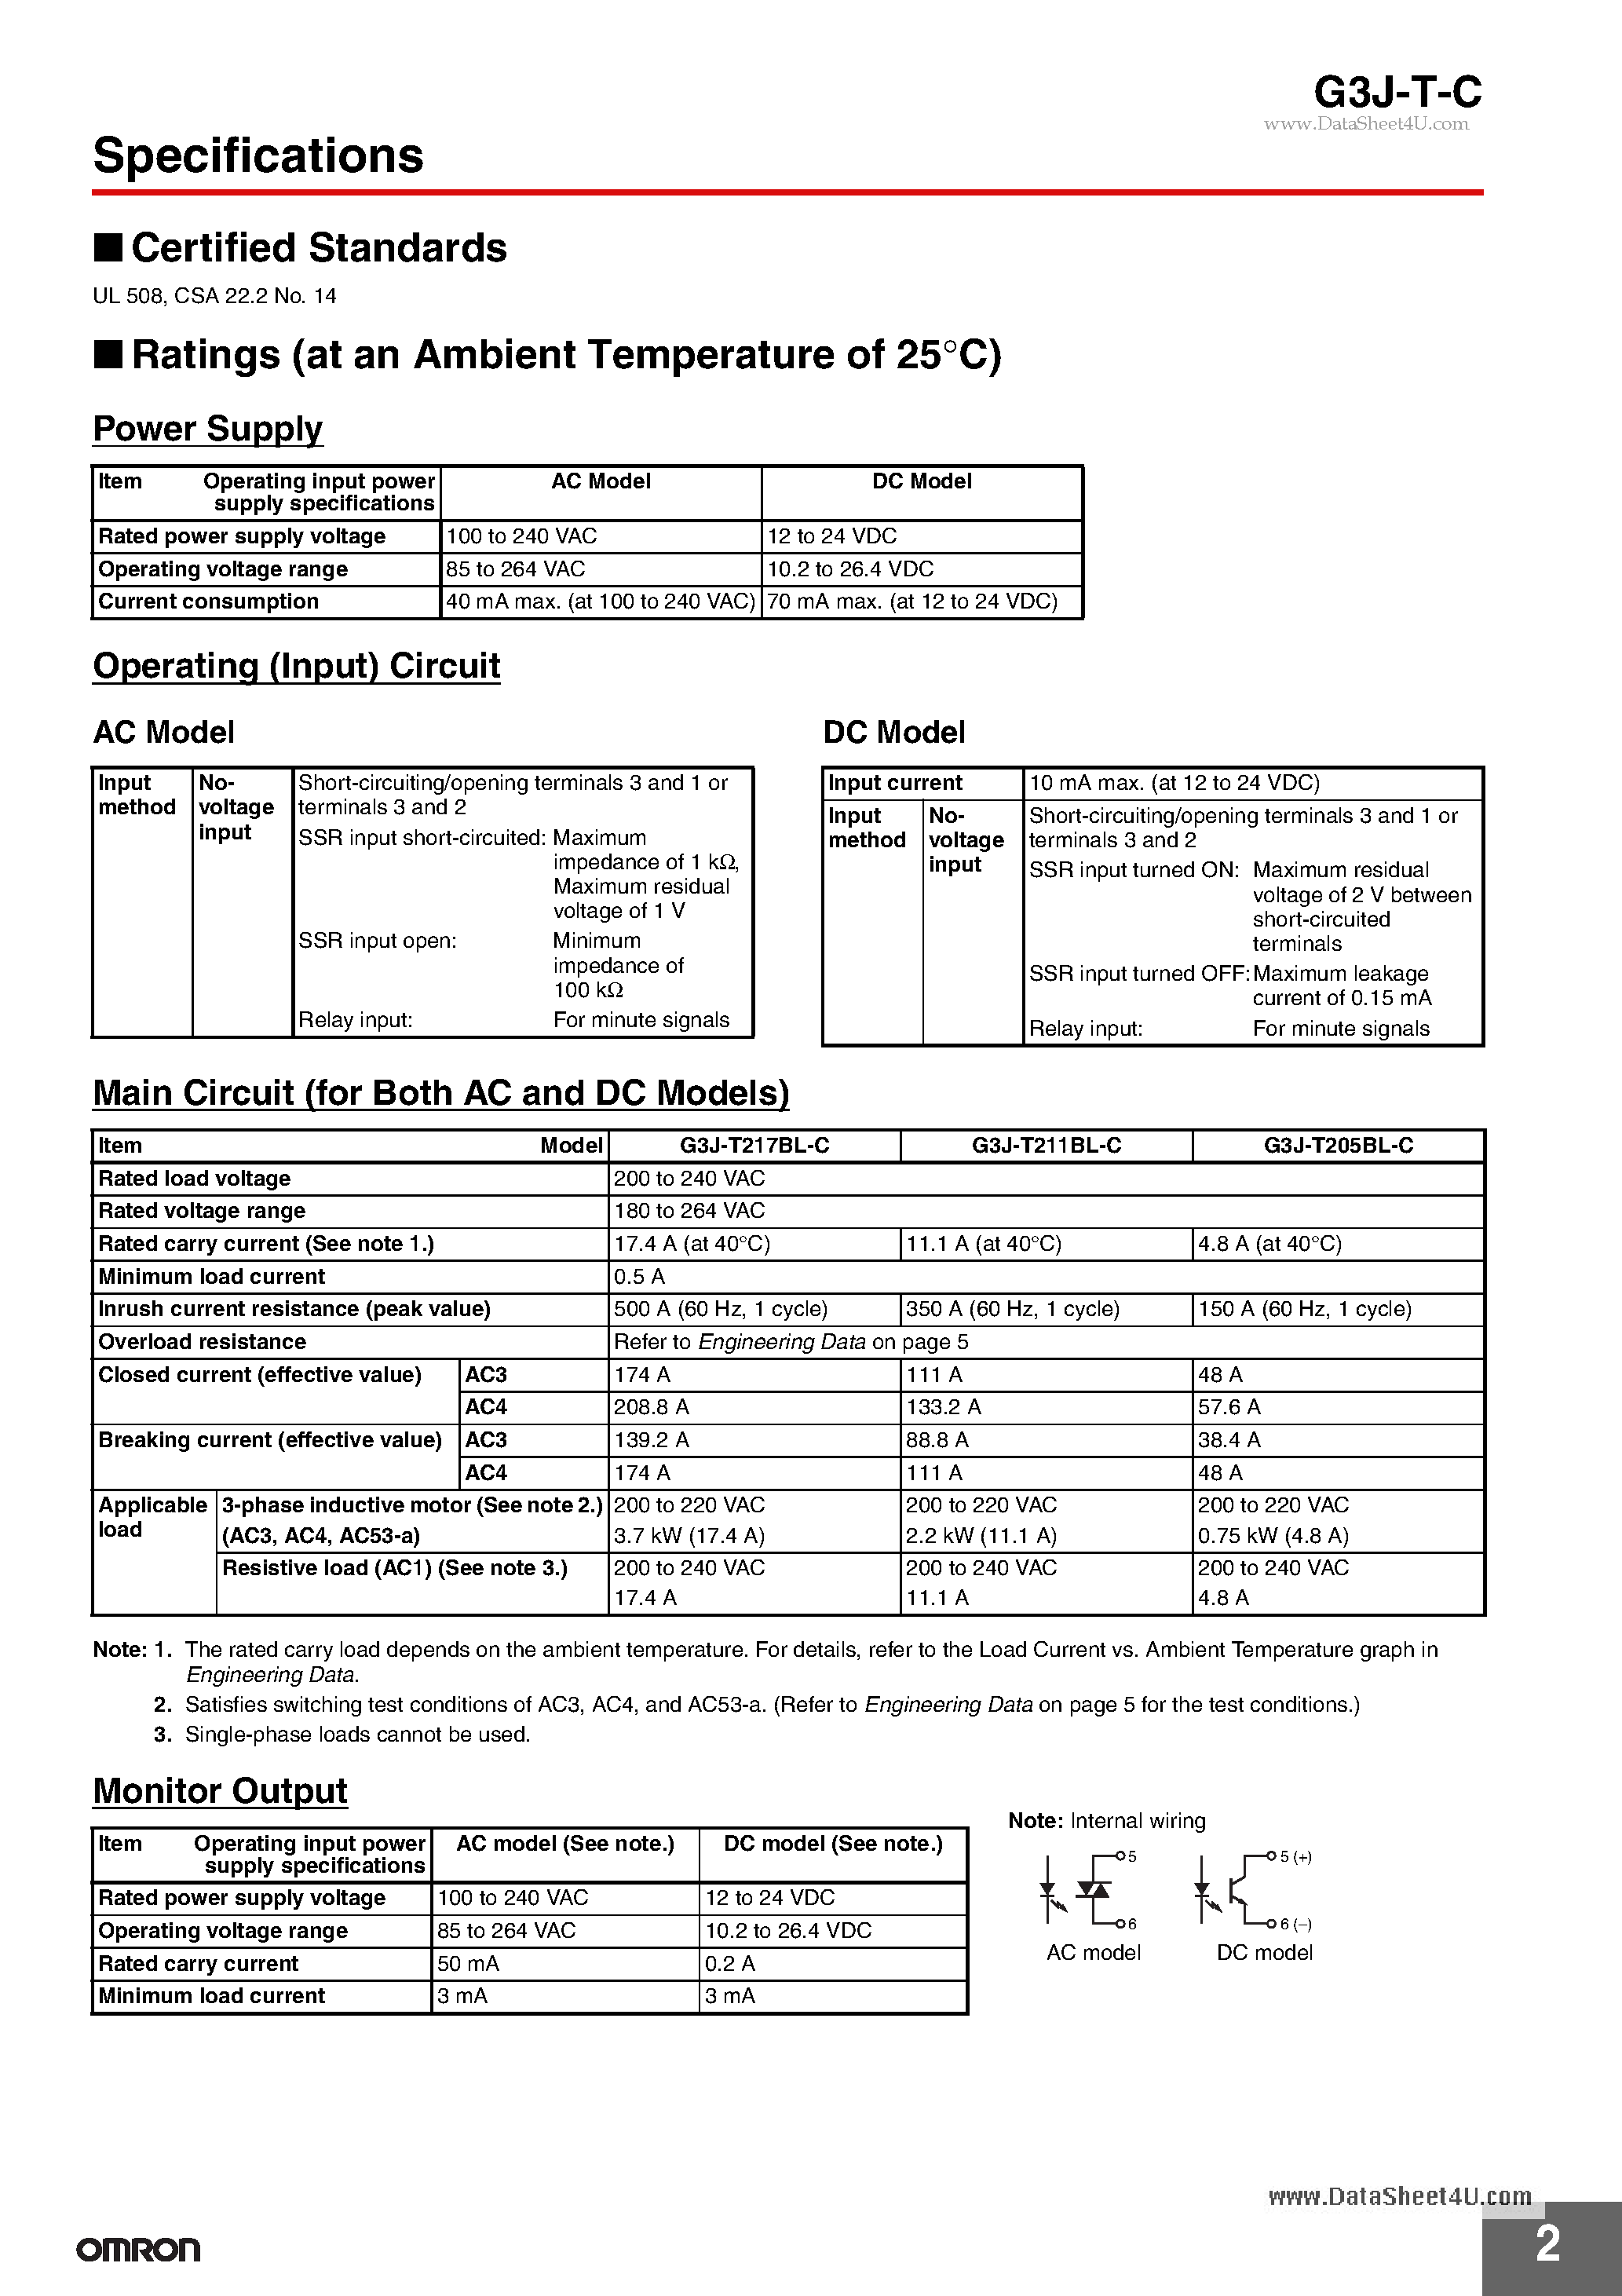 Datasheet G3J-T-C - Solid State Contactor for 3-phase Motors page 2